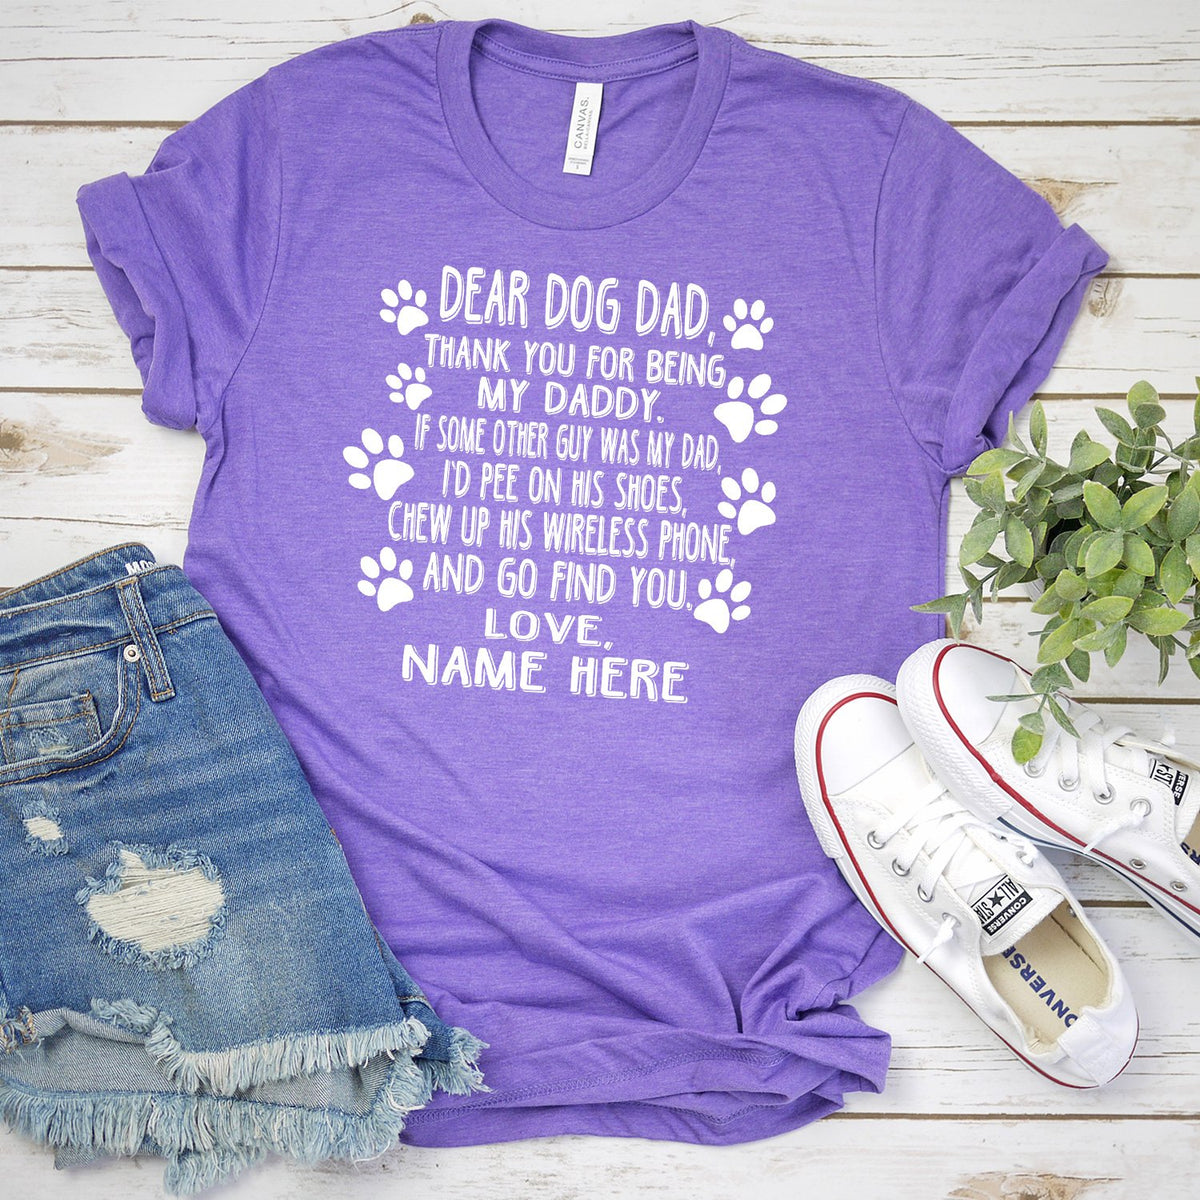 Dear Dog Dad Thank You For Being My Daddy - Short Sleeve Tee Shirt